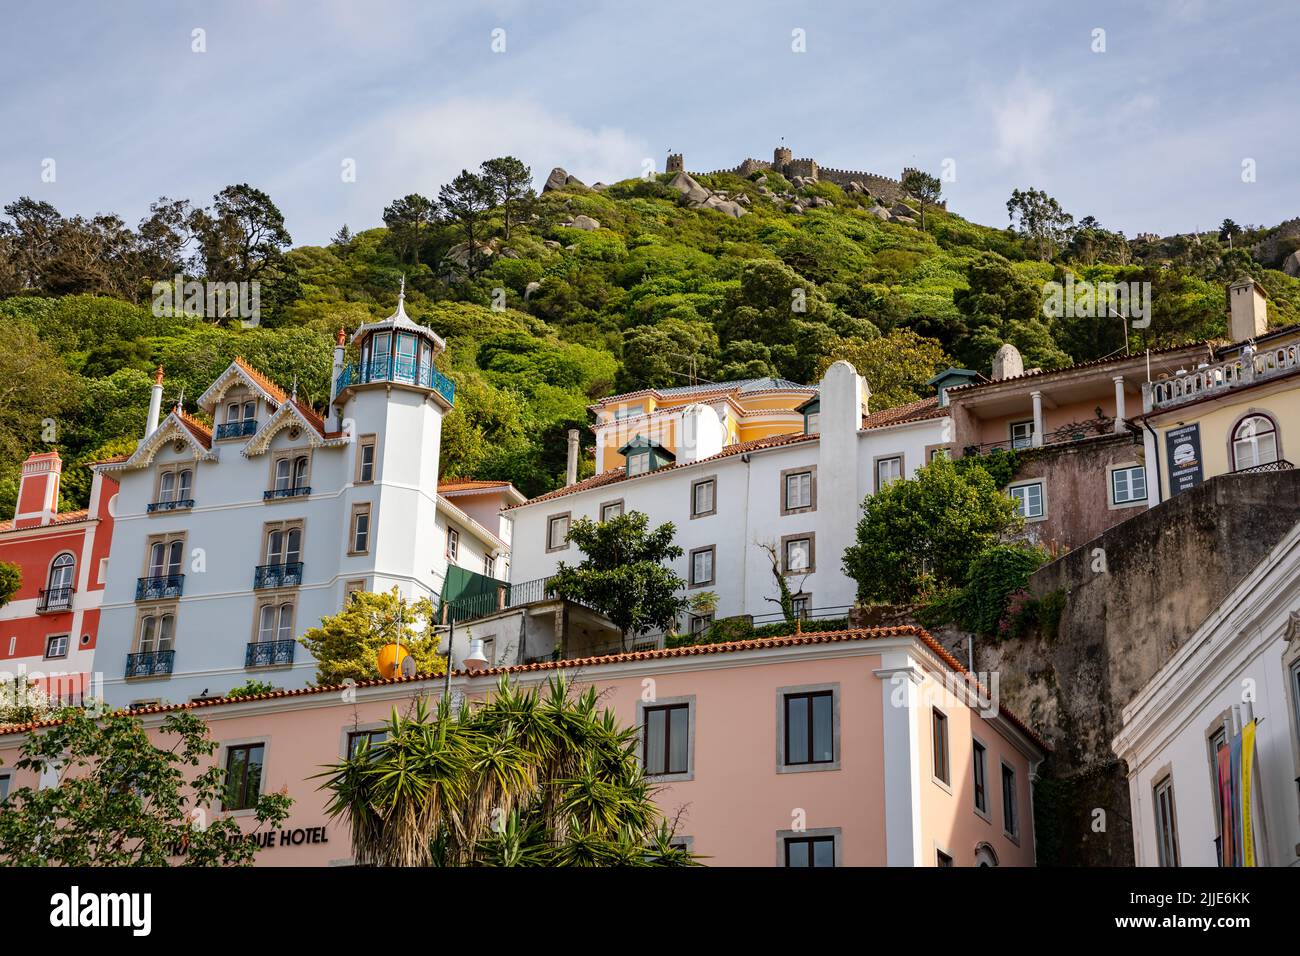 View over the houses of Sintra up to the castle fortress of Castelo dos Mouros in the forest above the town, Portugal Stock Photo